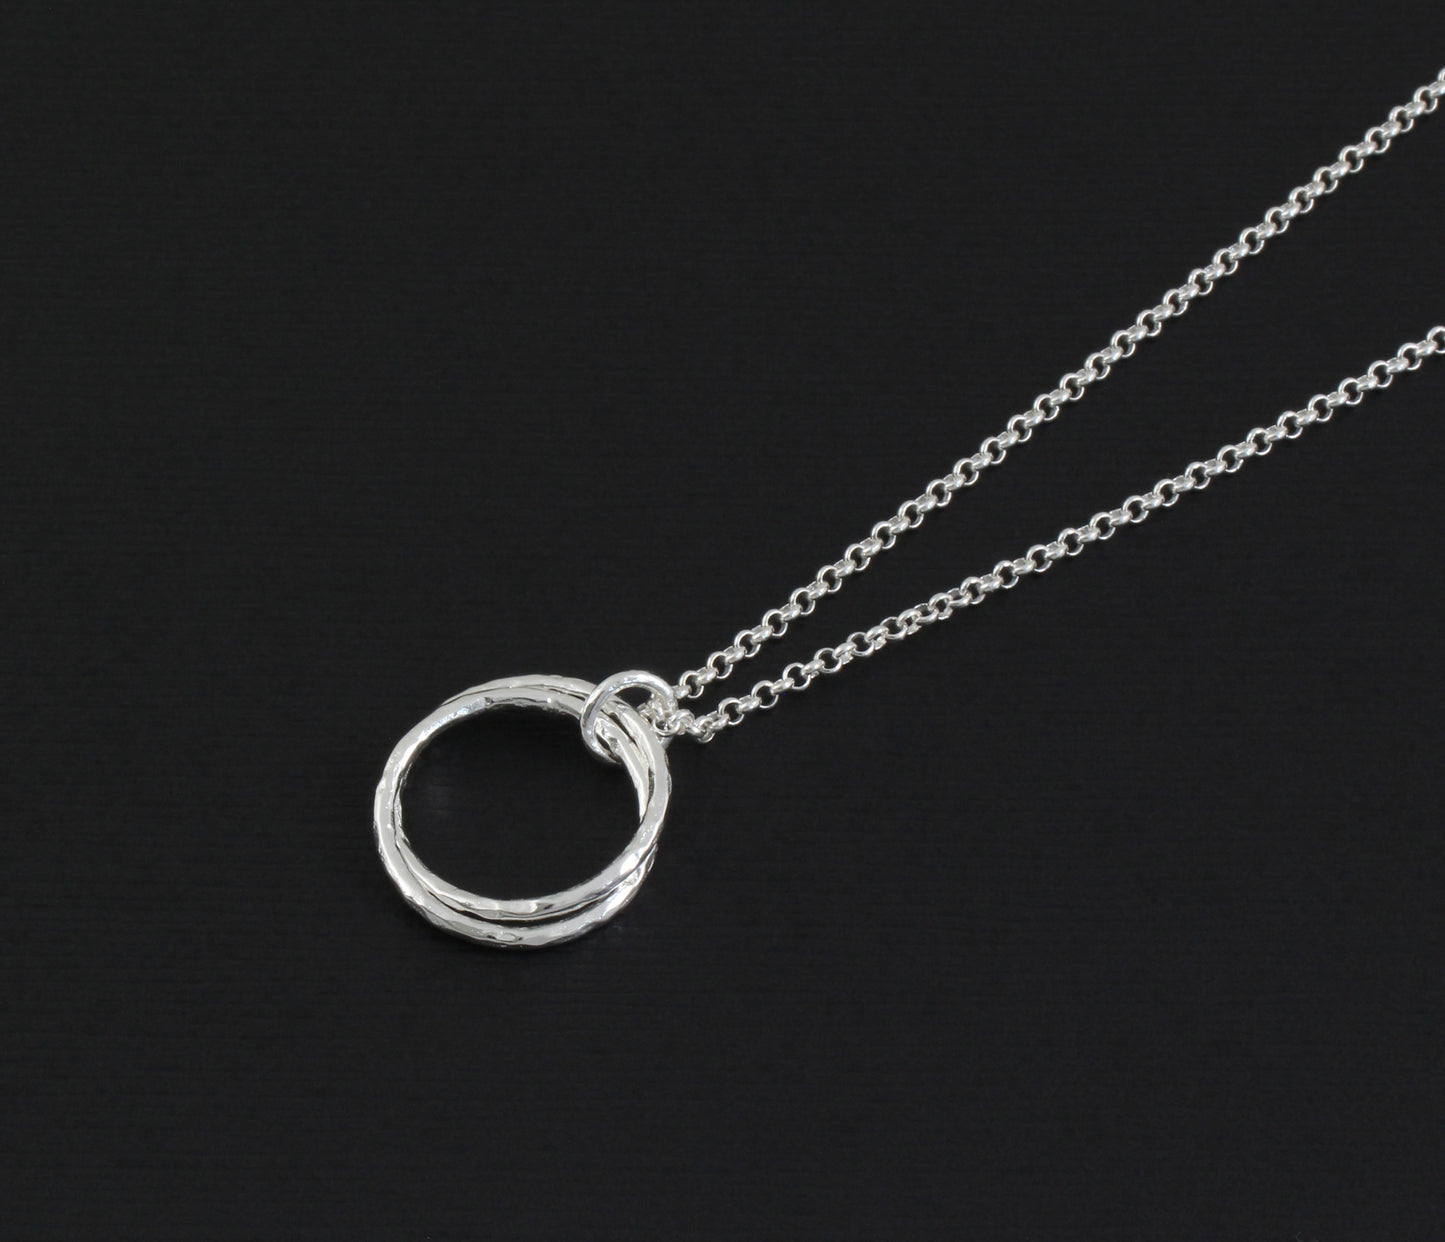 Hammered Linked Infinity Ring Necklace - Perfect for Birthdays, Valentines Day, Gift Giving - Best Friend Gifts